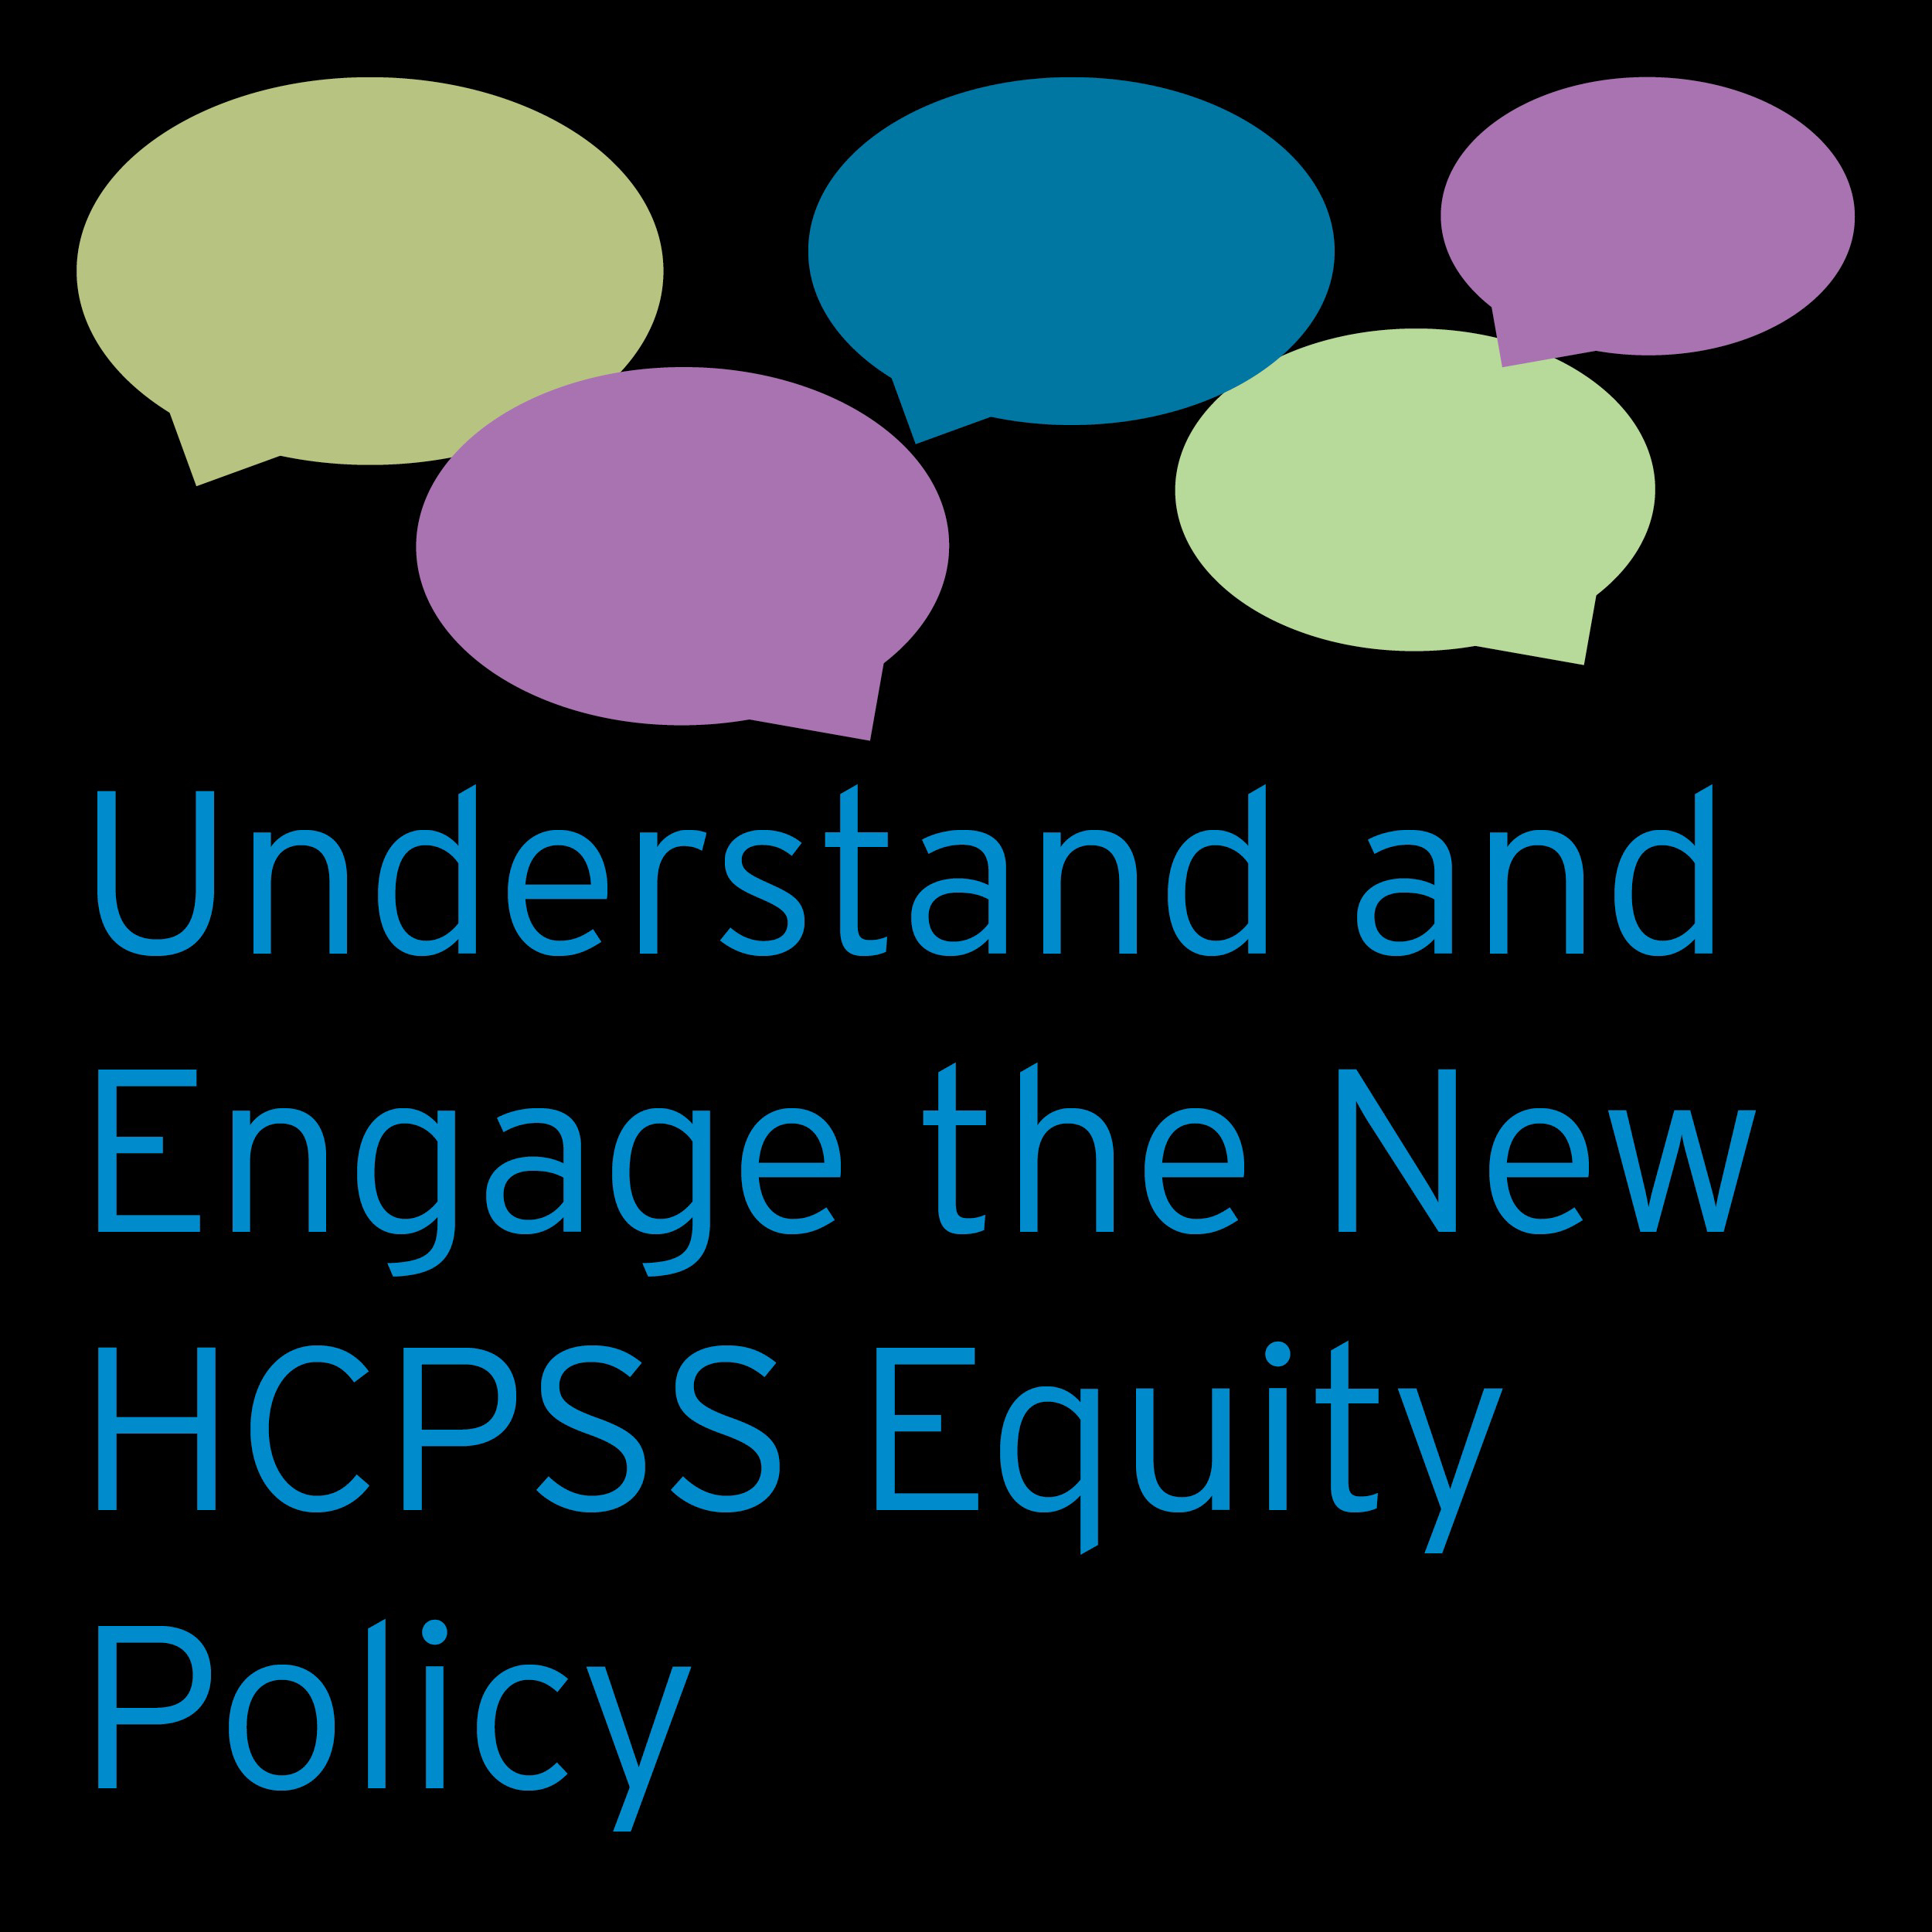 Conversation balloons with text “Understand and Engage the New HCPSS equity Policy”